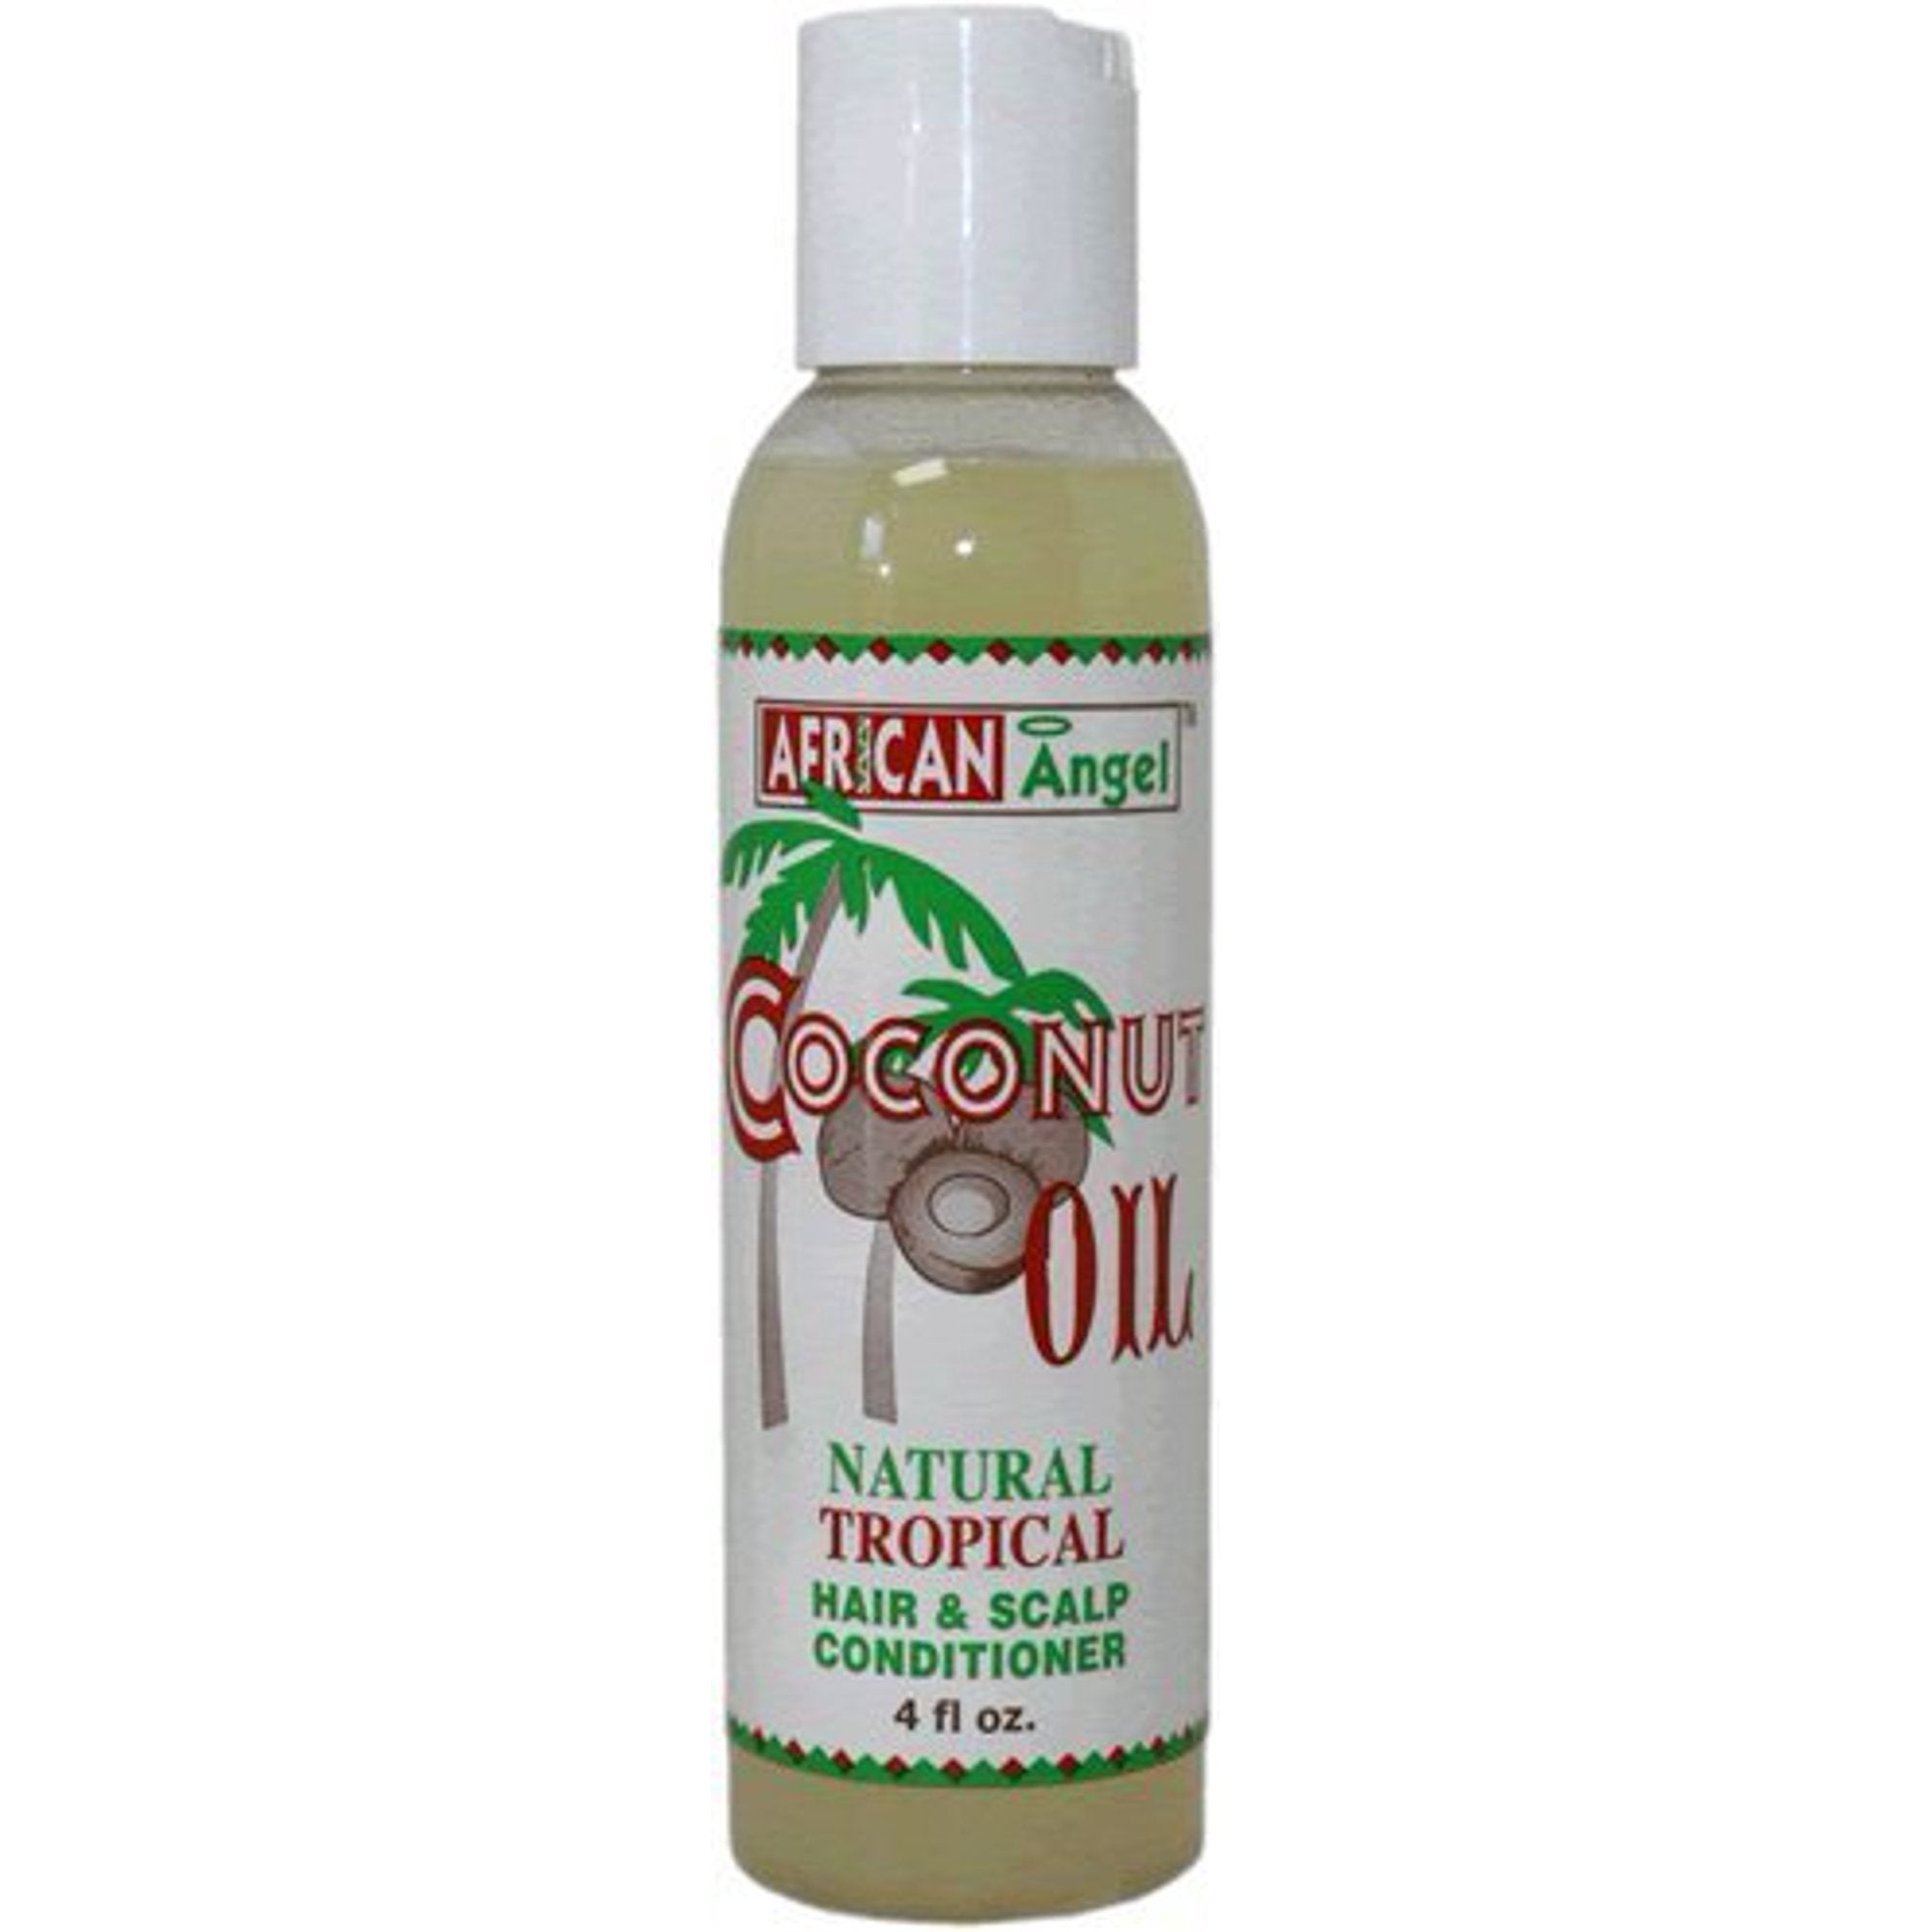 AFRICAN ANGEL COCONUT OIL 4oz-African Angel- Hive Beauty Supply